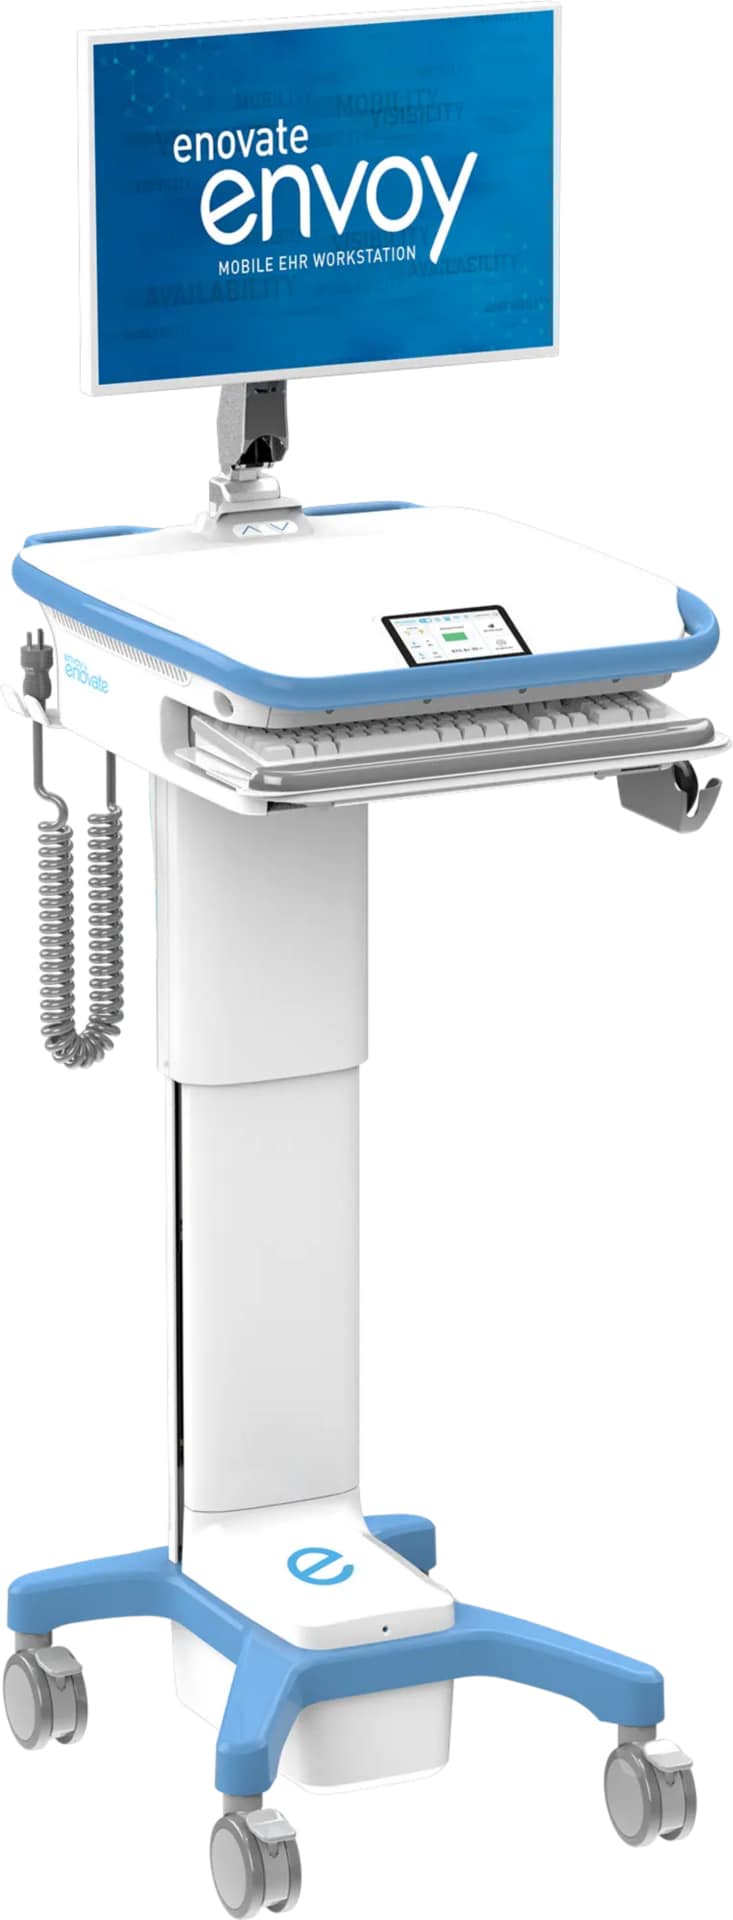 Enovate Medical Envoy 2.0 Corded Mobile Workstation with Straight AutoTrax